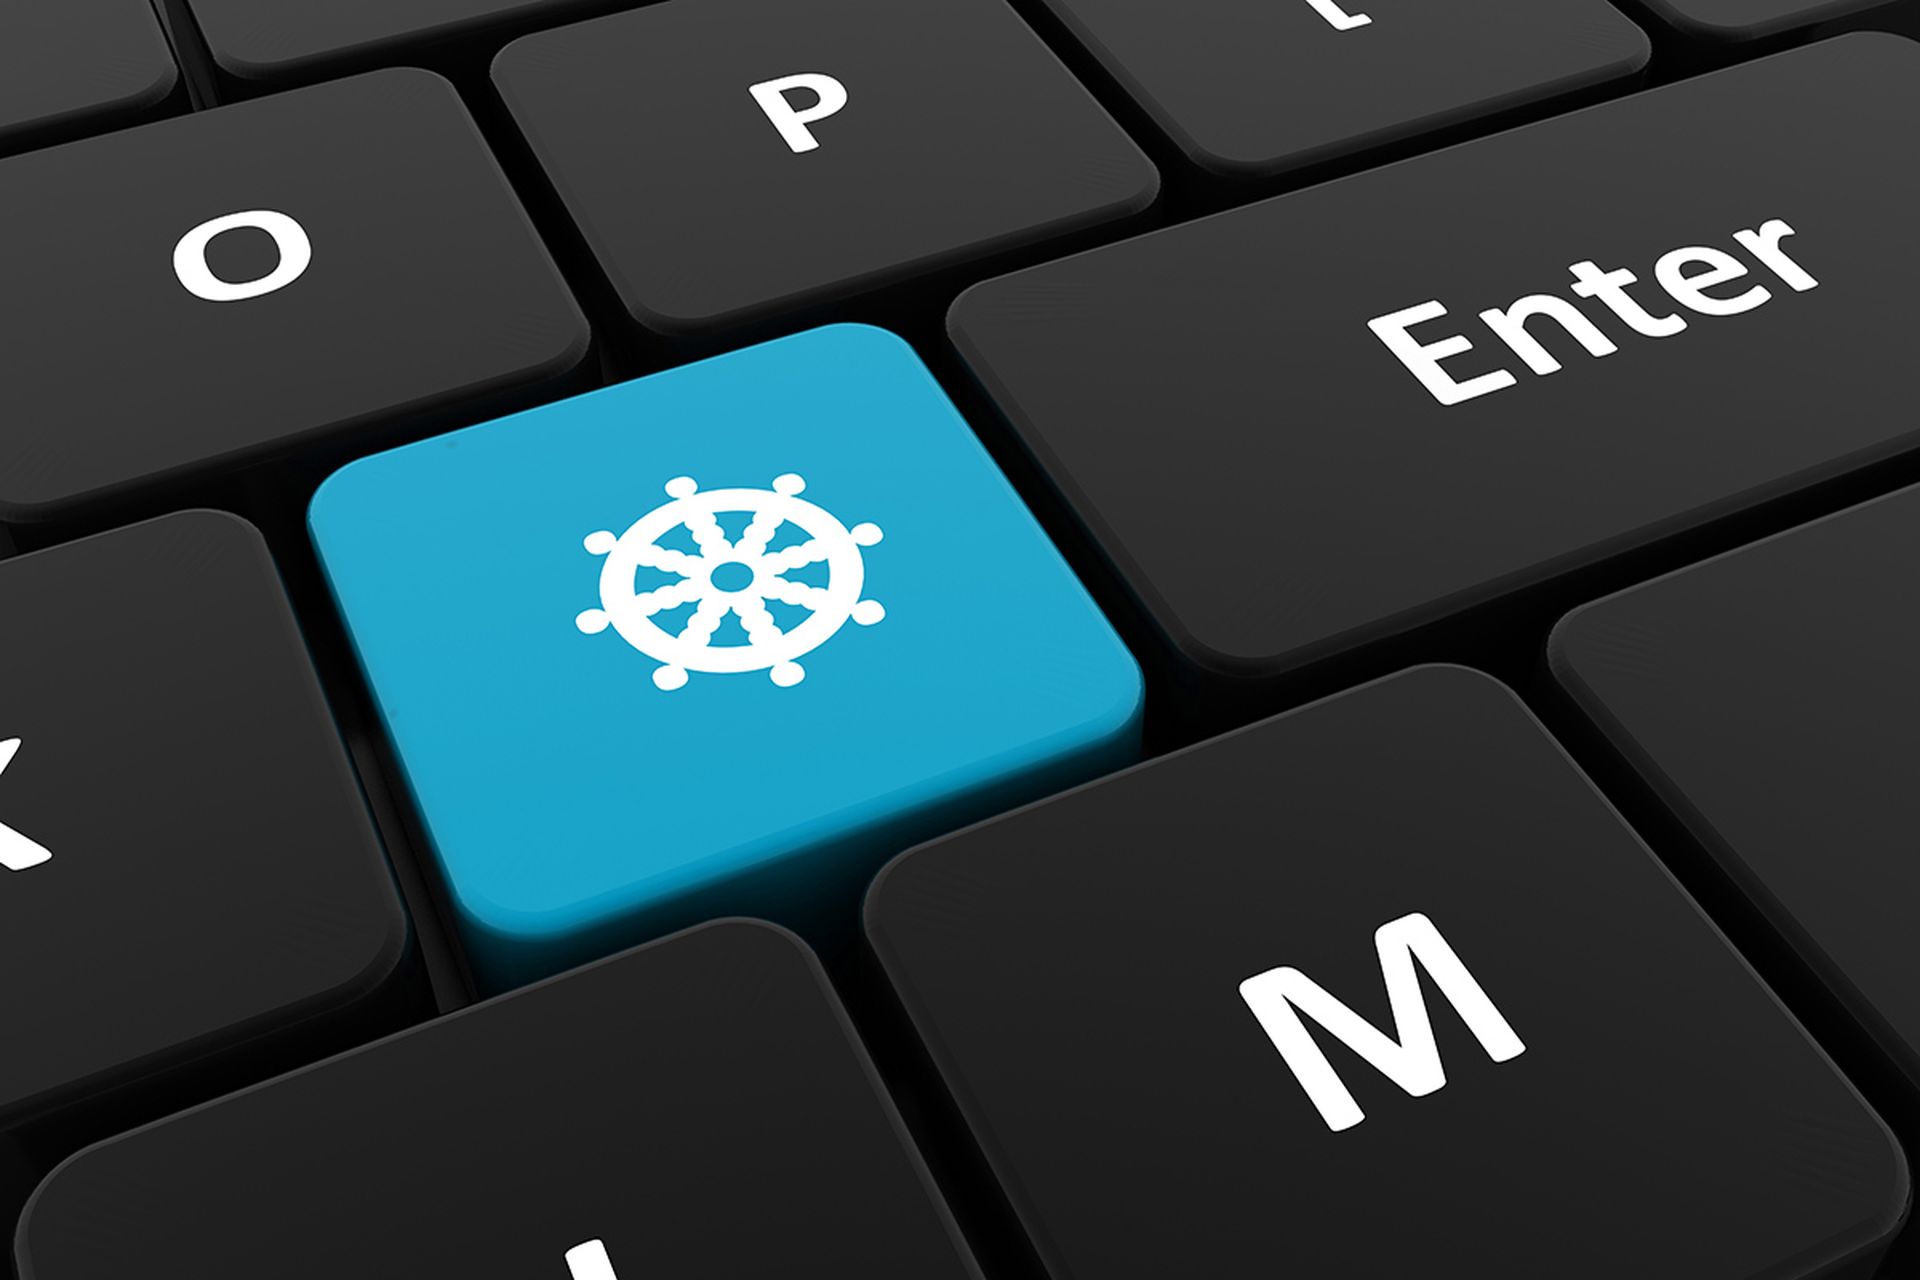 Computer keyboard, close-up button with the image of a ship's steering wheel